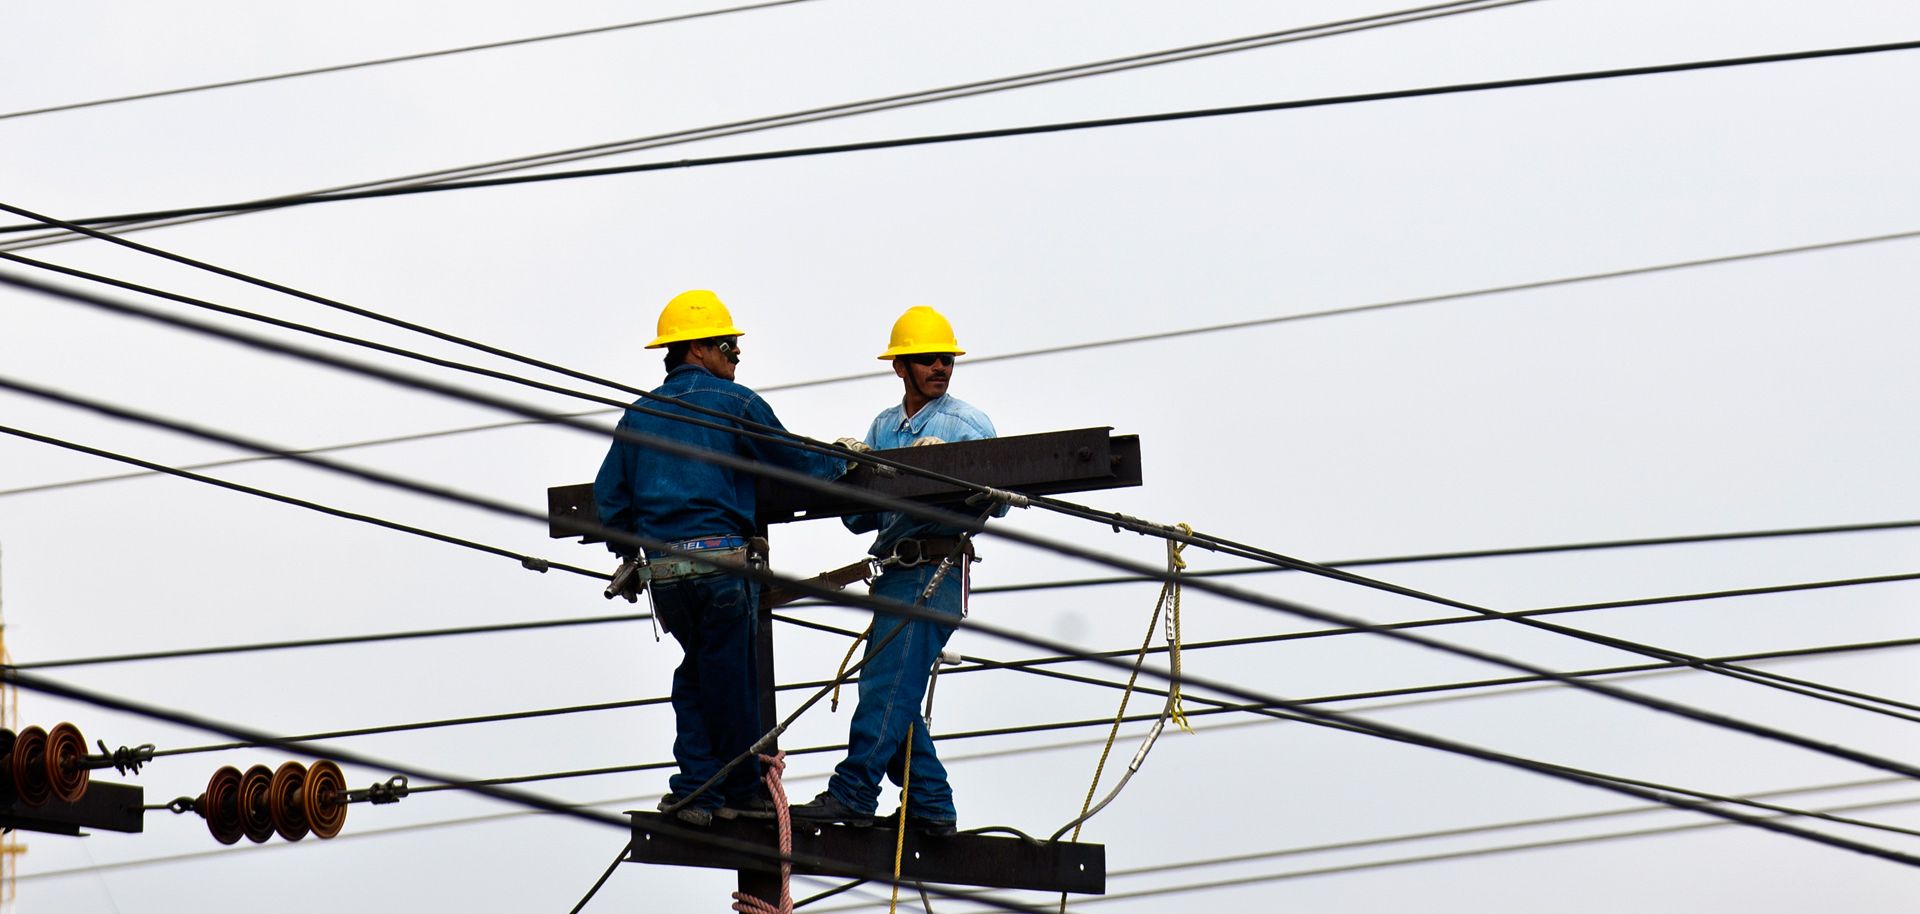 Mexican Electrical Reforms Will Spur Development